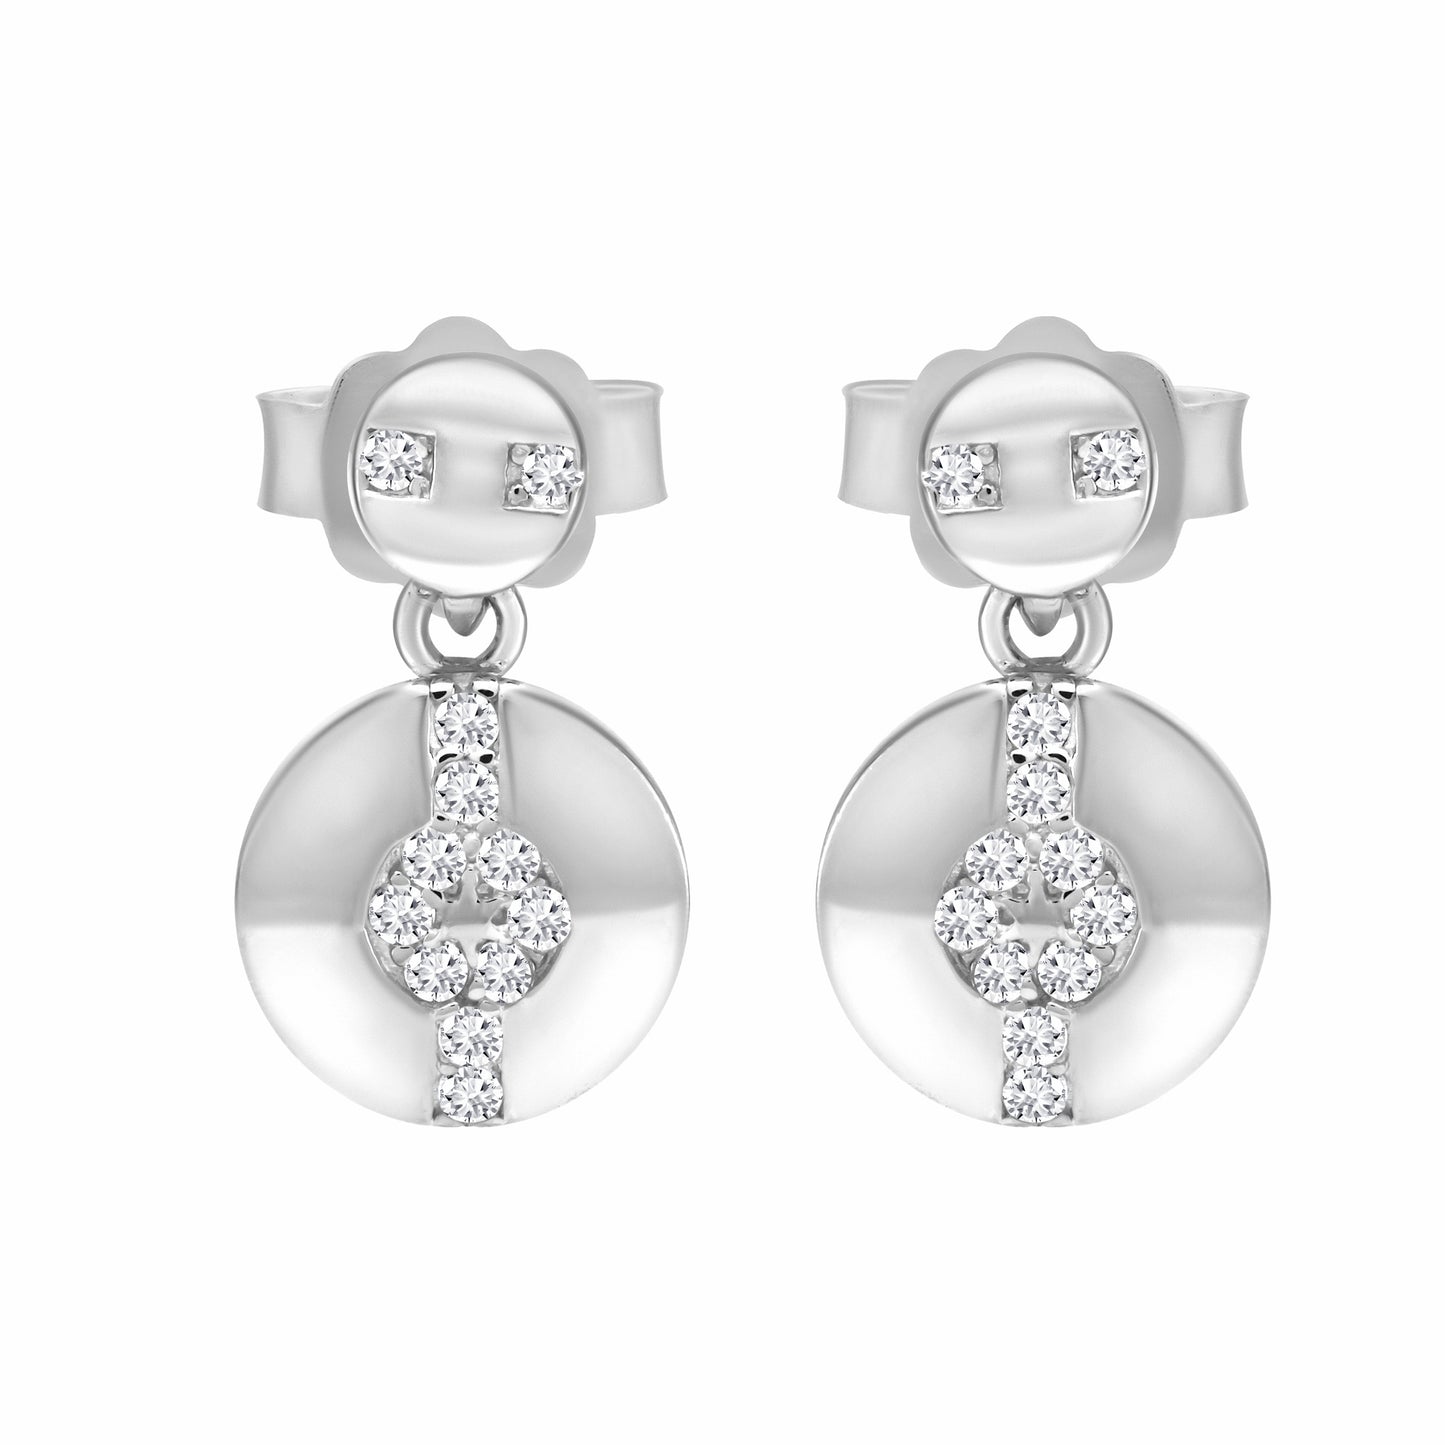 Hypnotic Solar Silver Earrings on white background